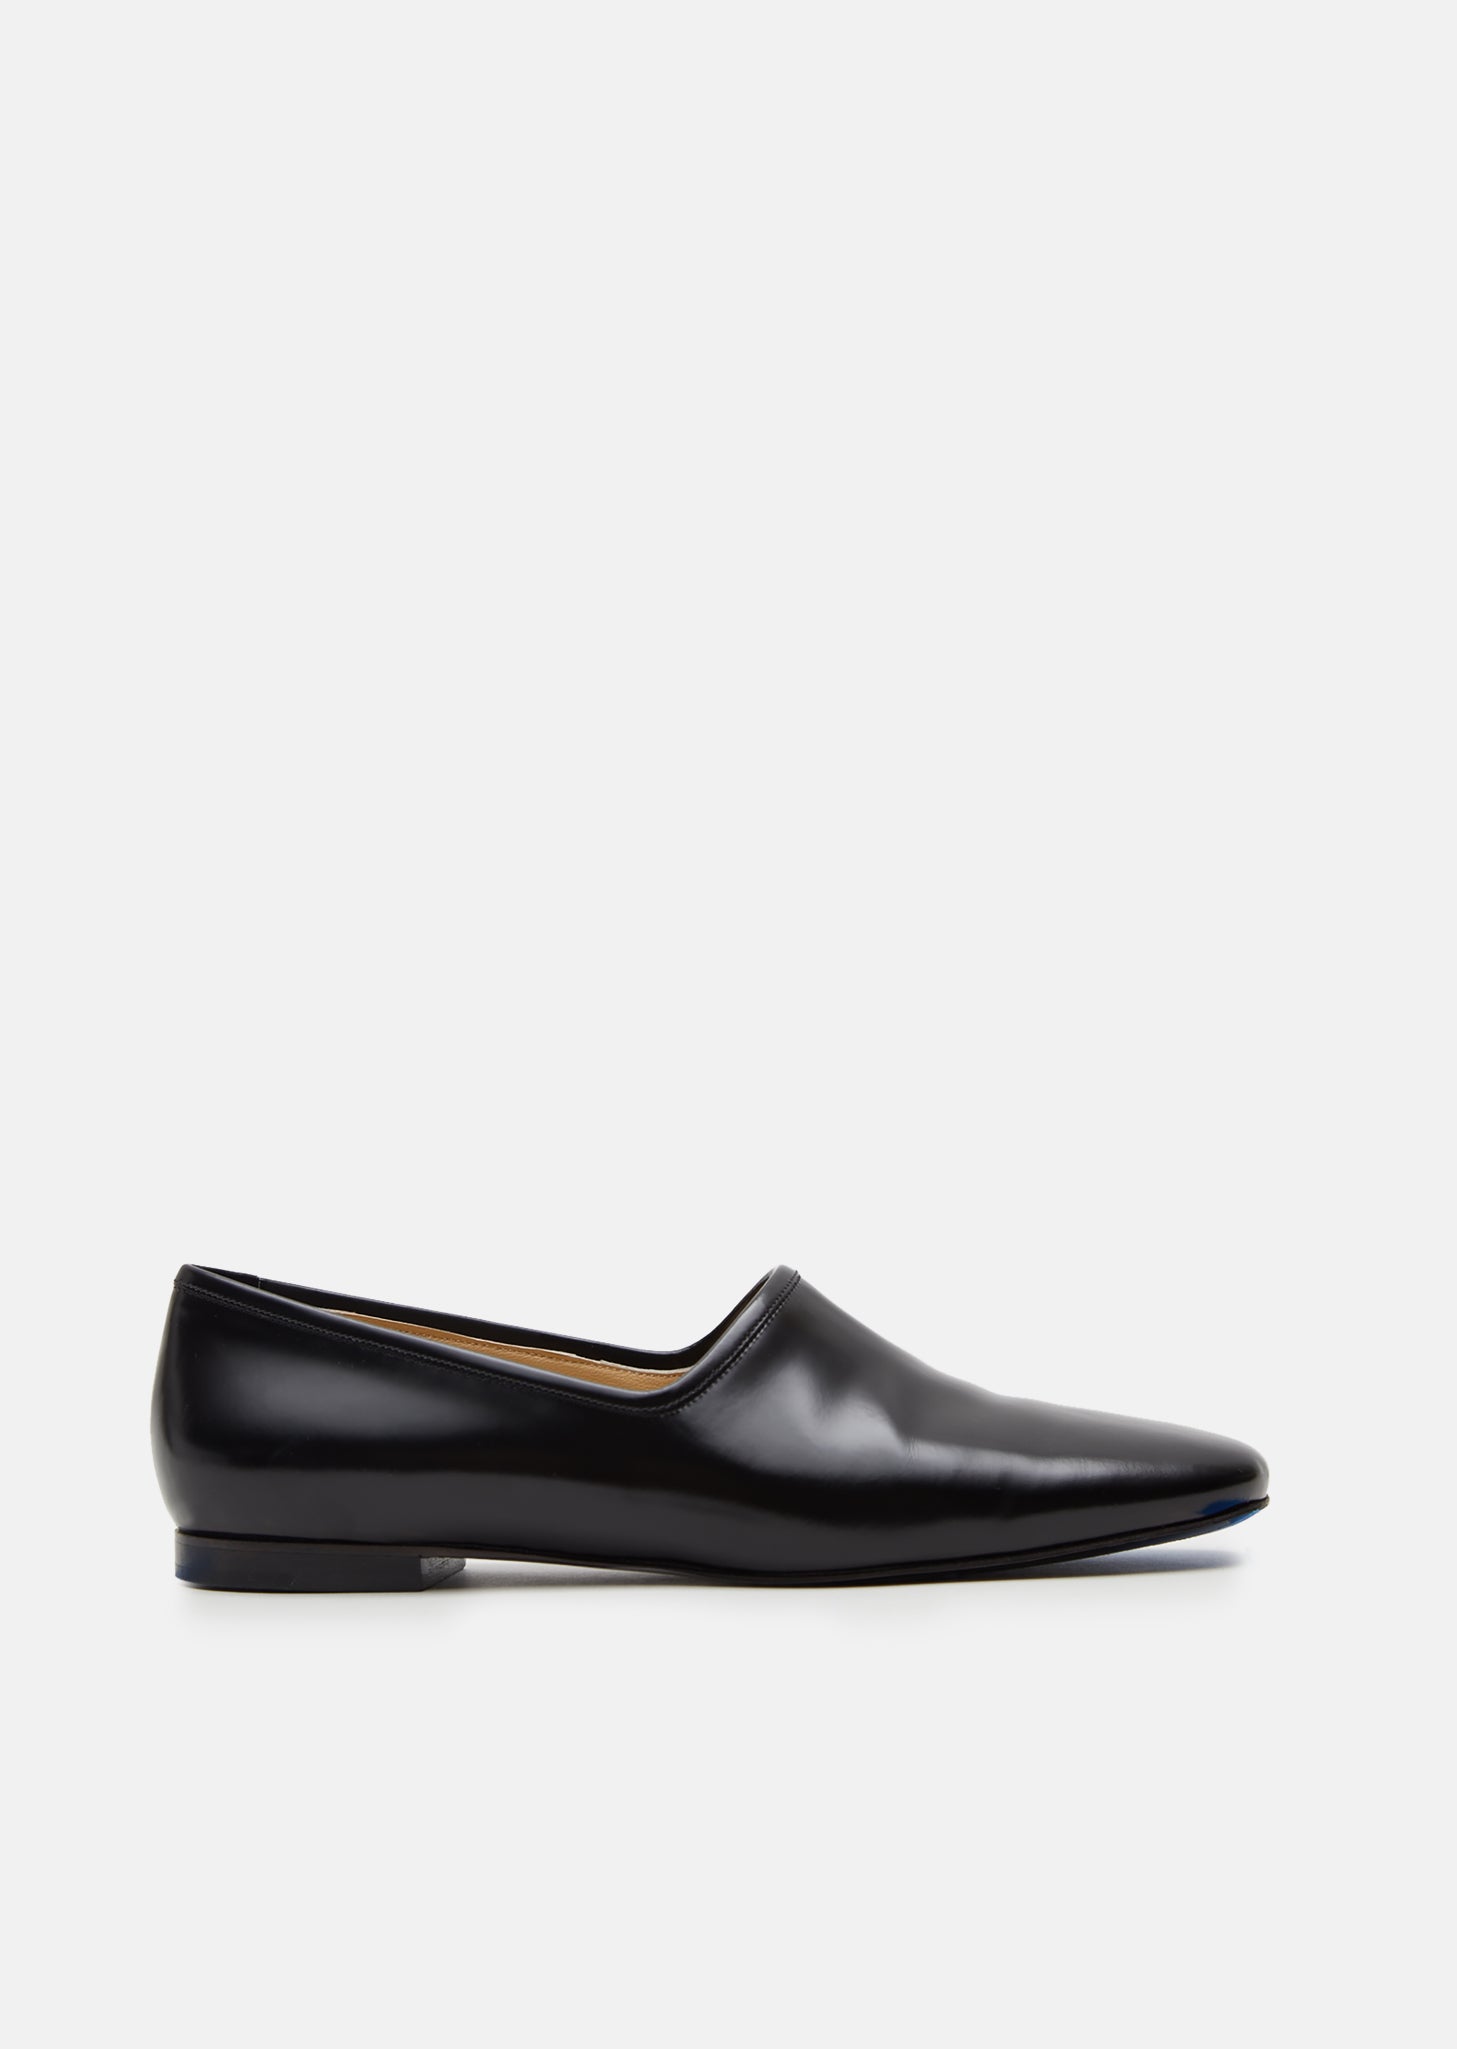 Leather flats Louis Feraud Black size 39 EU in Leather - 21339016